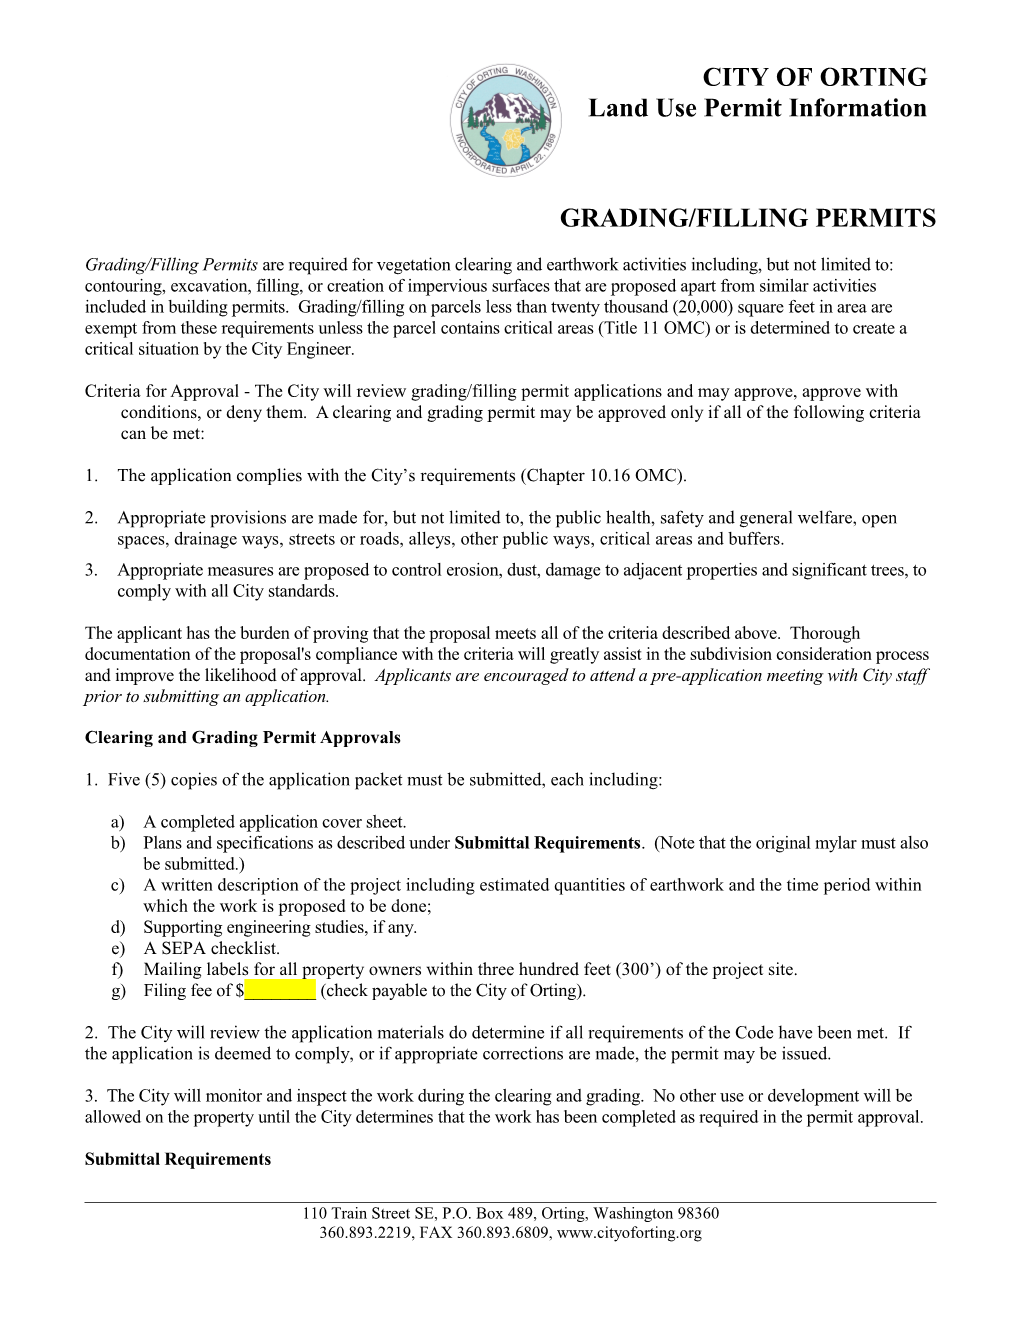 CITY of ORTING - Land Use Permit Information